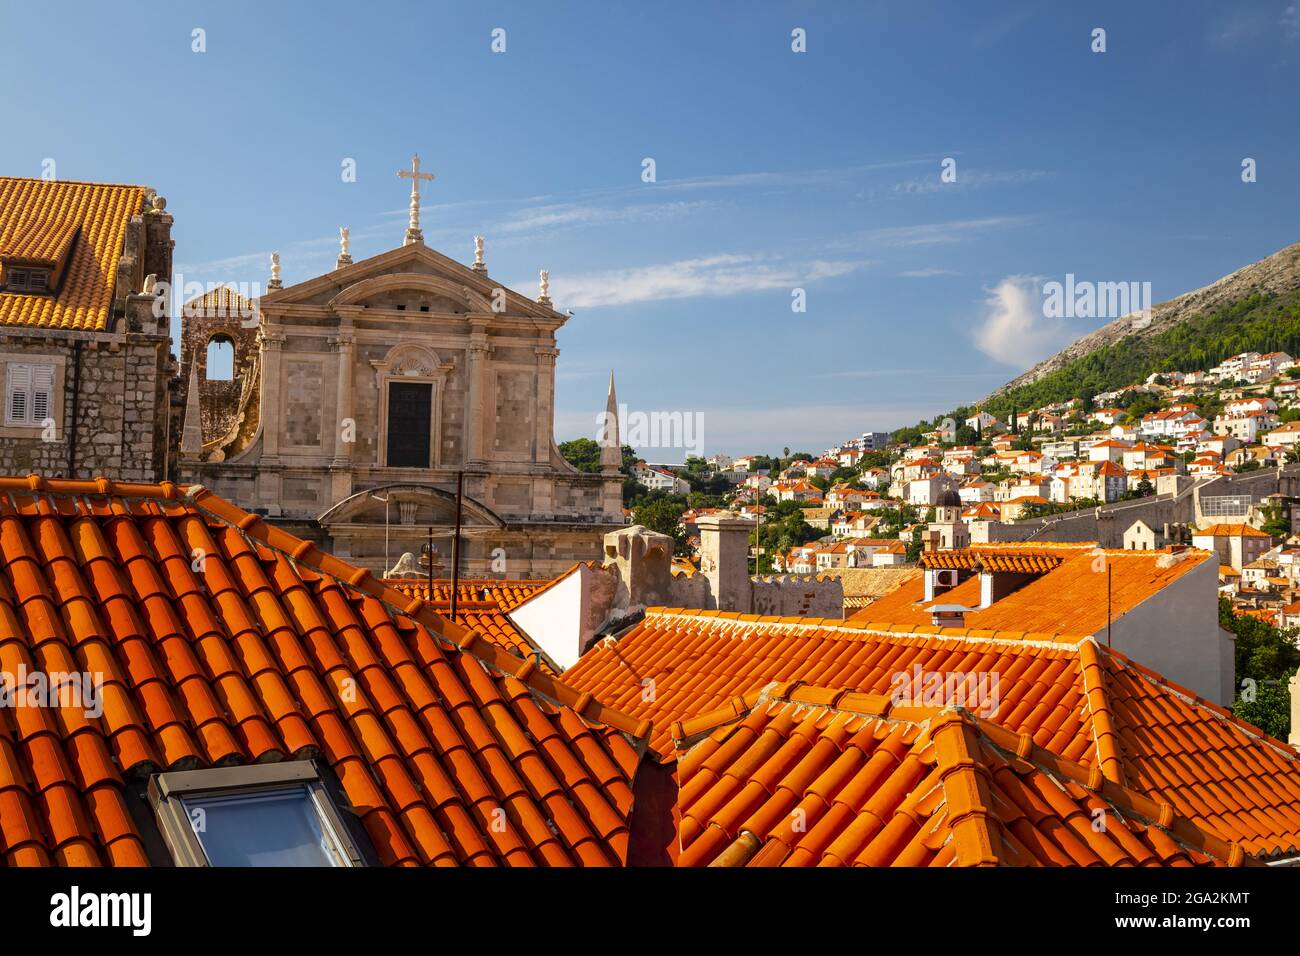 Overlooking the Old Town of the walled city of Dubrovnik, from terracotta tiled rooftops and the Church of St Ignatius to the coastal hillside cove... Stock Photo